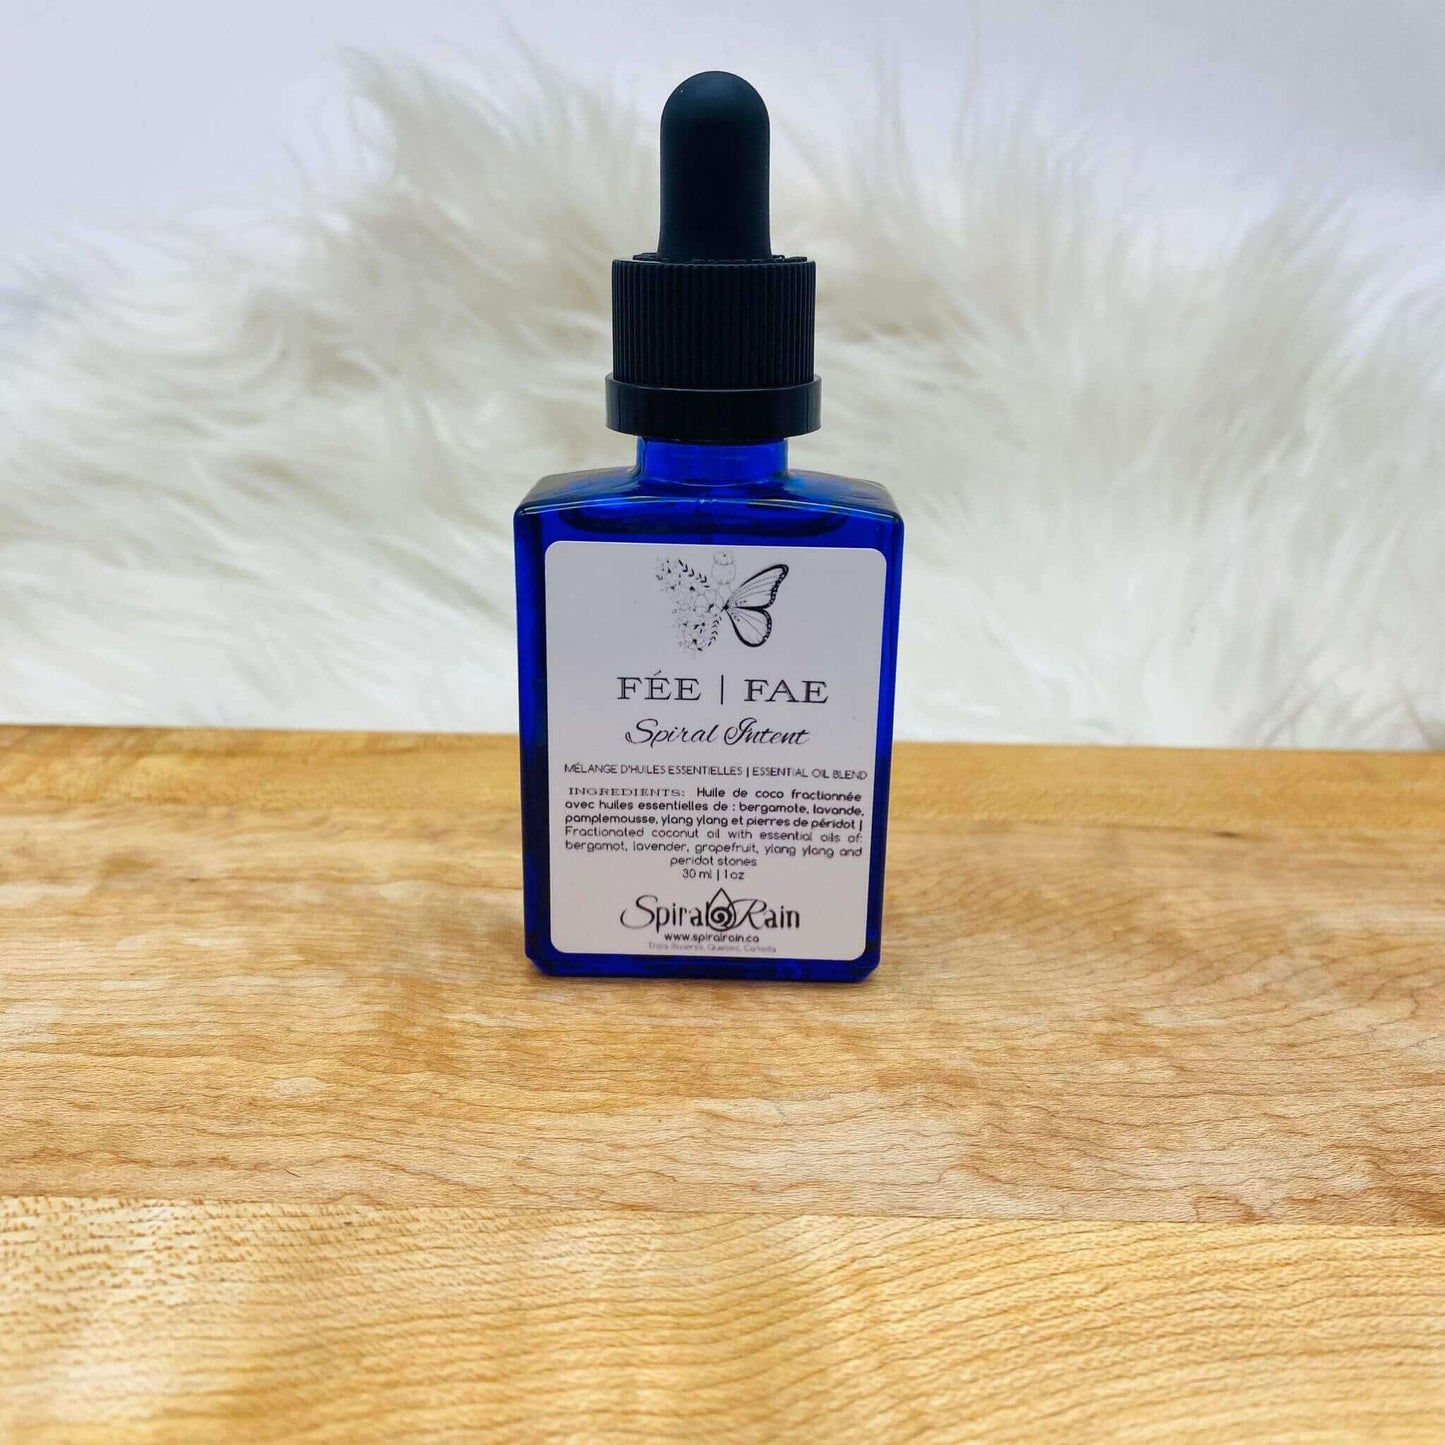 Fae Ritual oil at $20 only from Spiral Rain